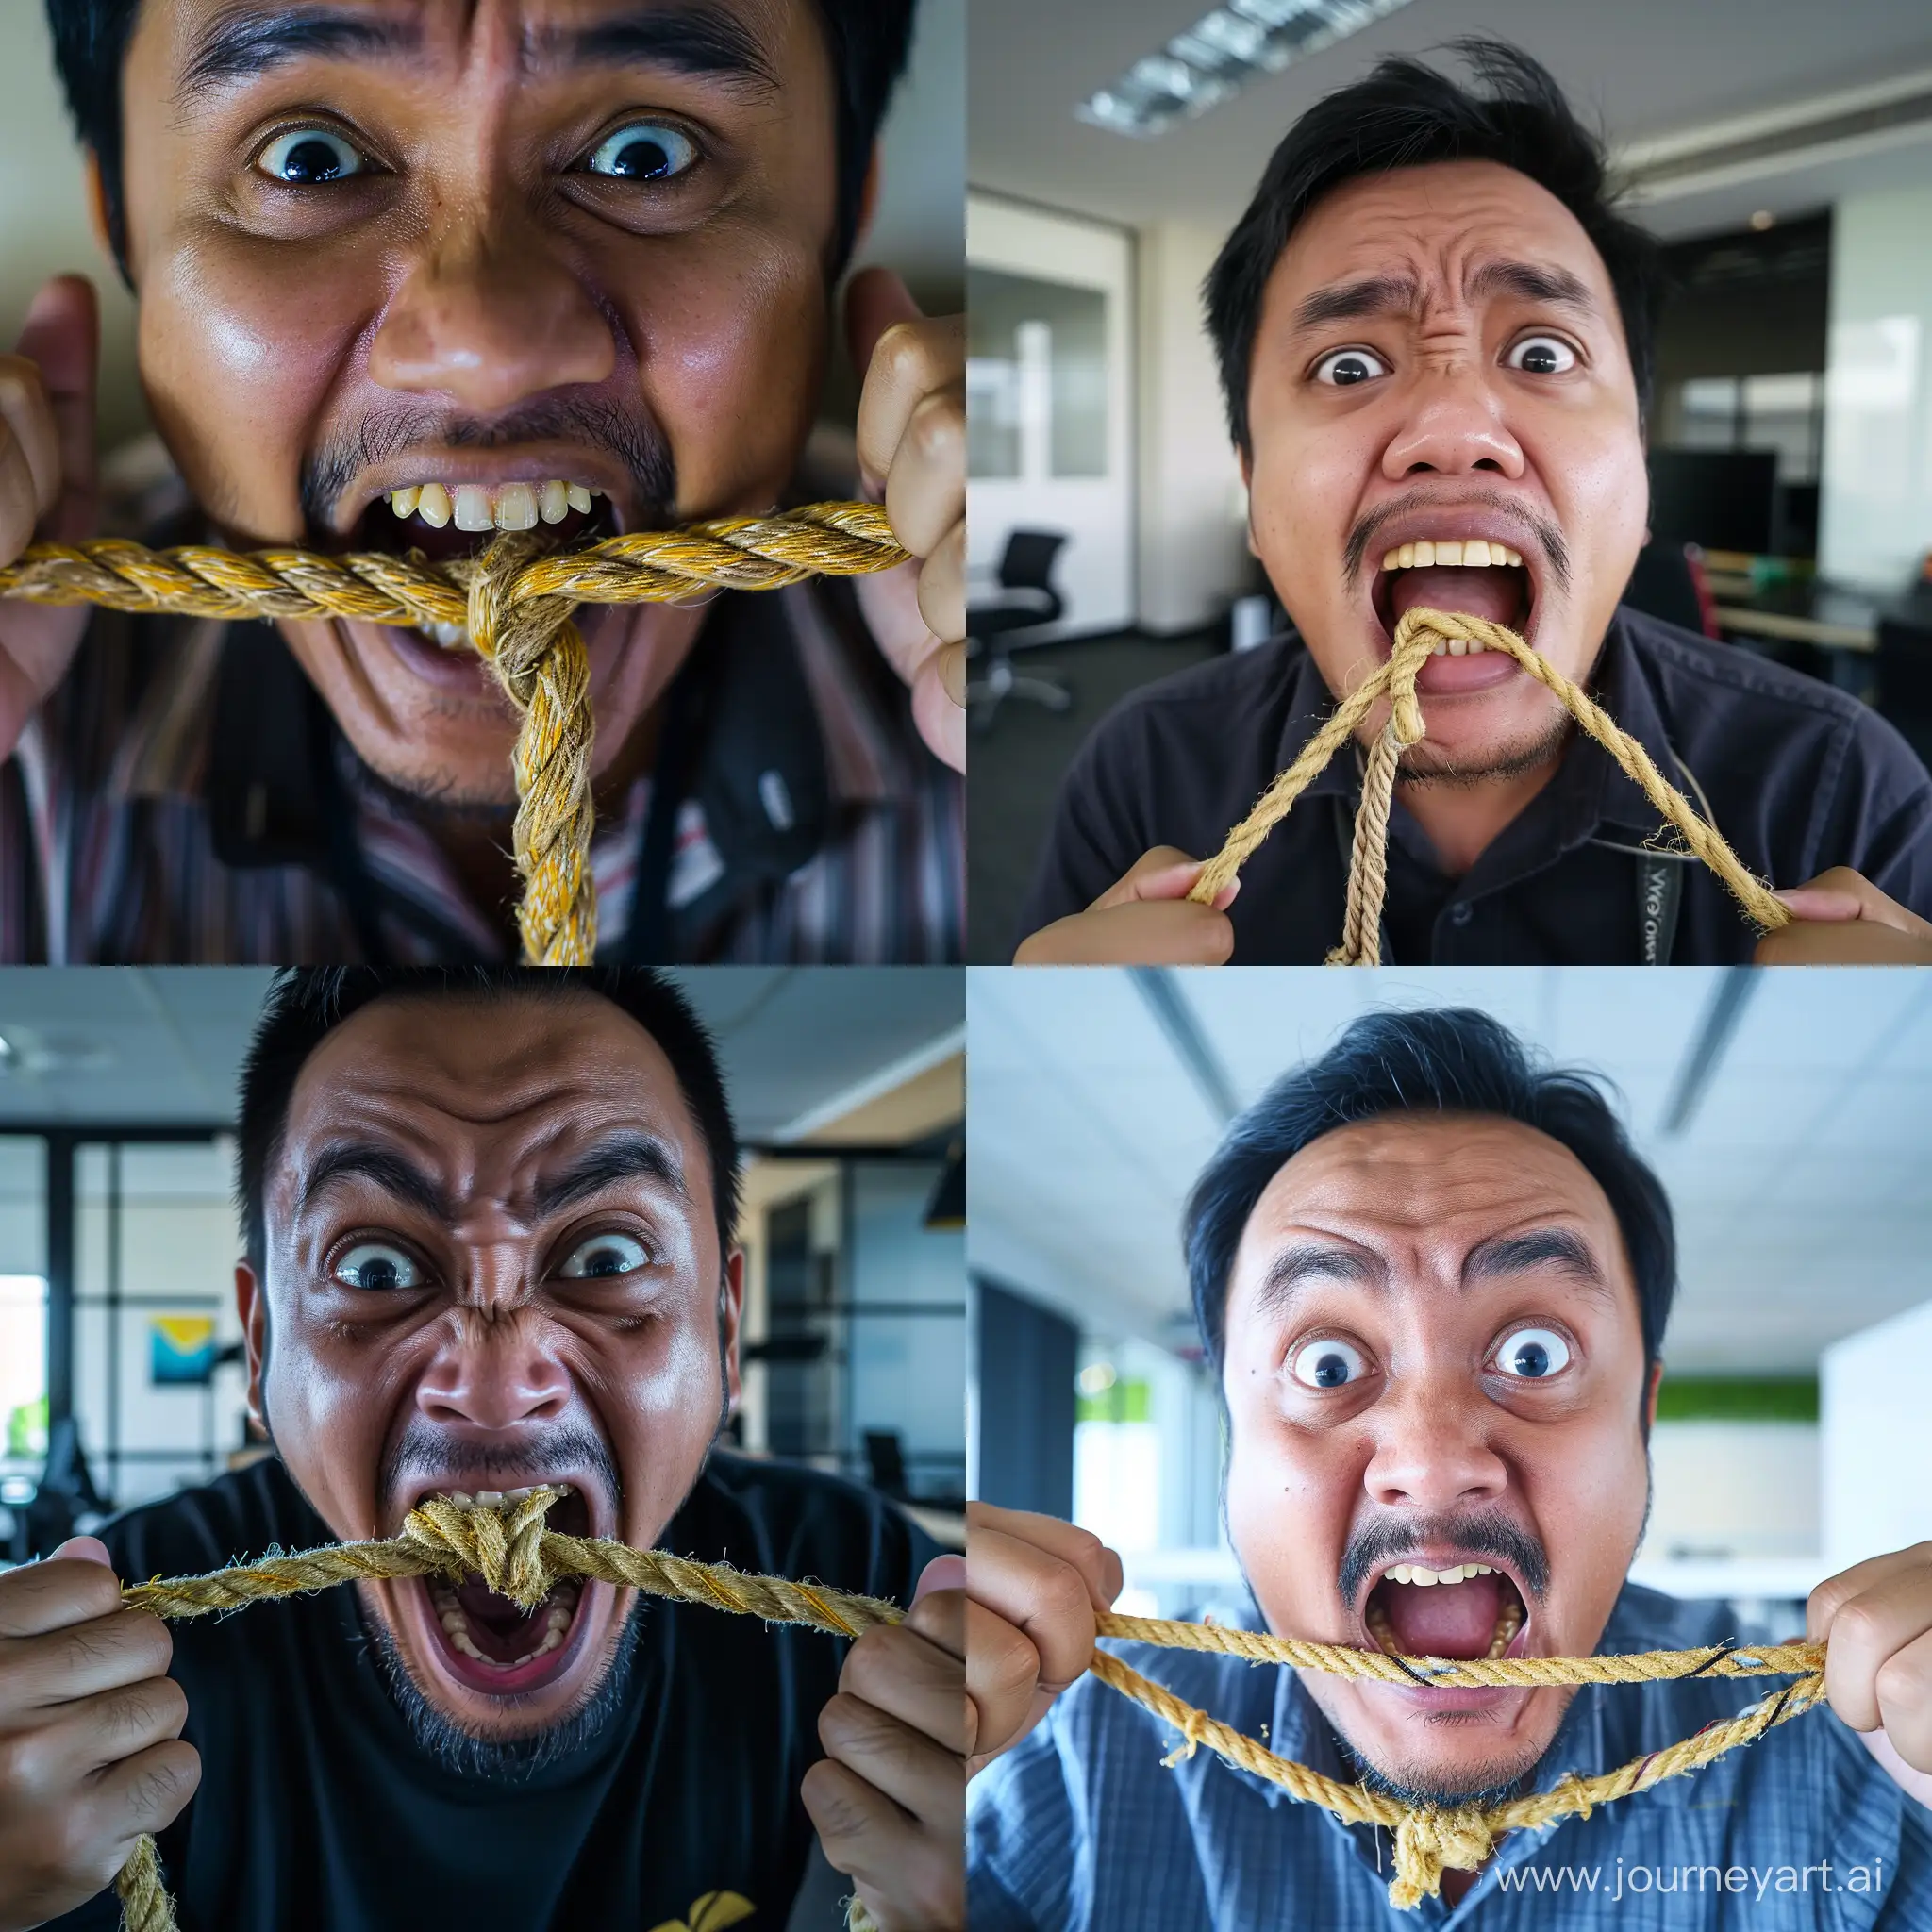 Satirical-CloseUp-Humorous-Malay-Man-Tied-Mouth-in-Modern-Office